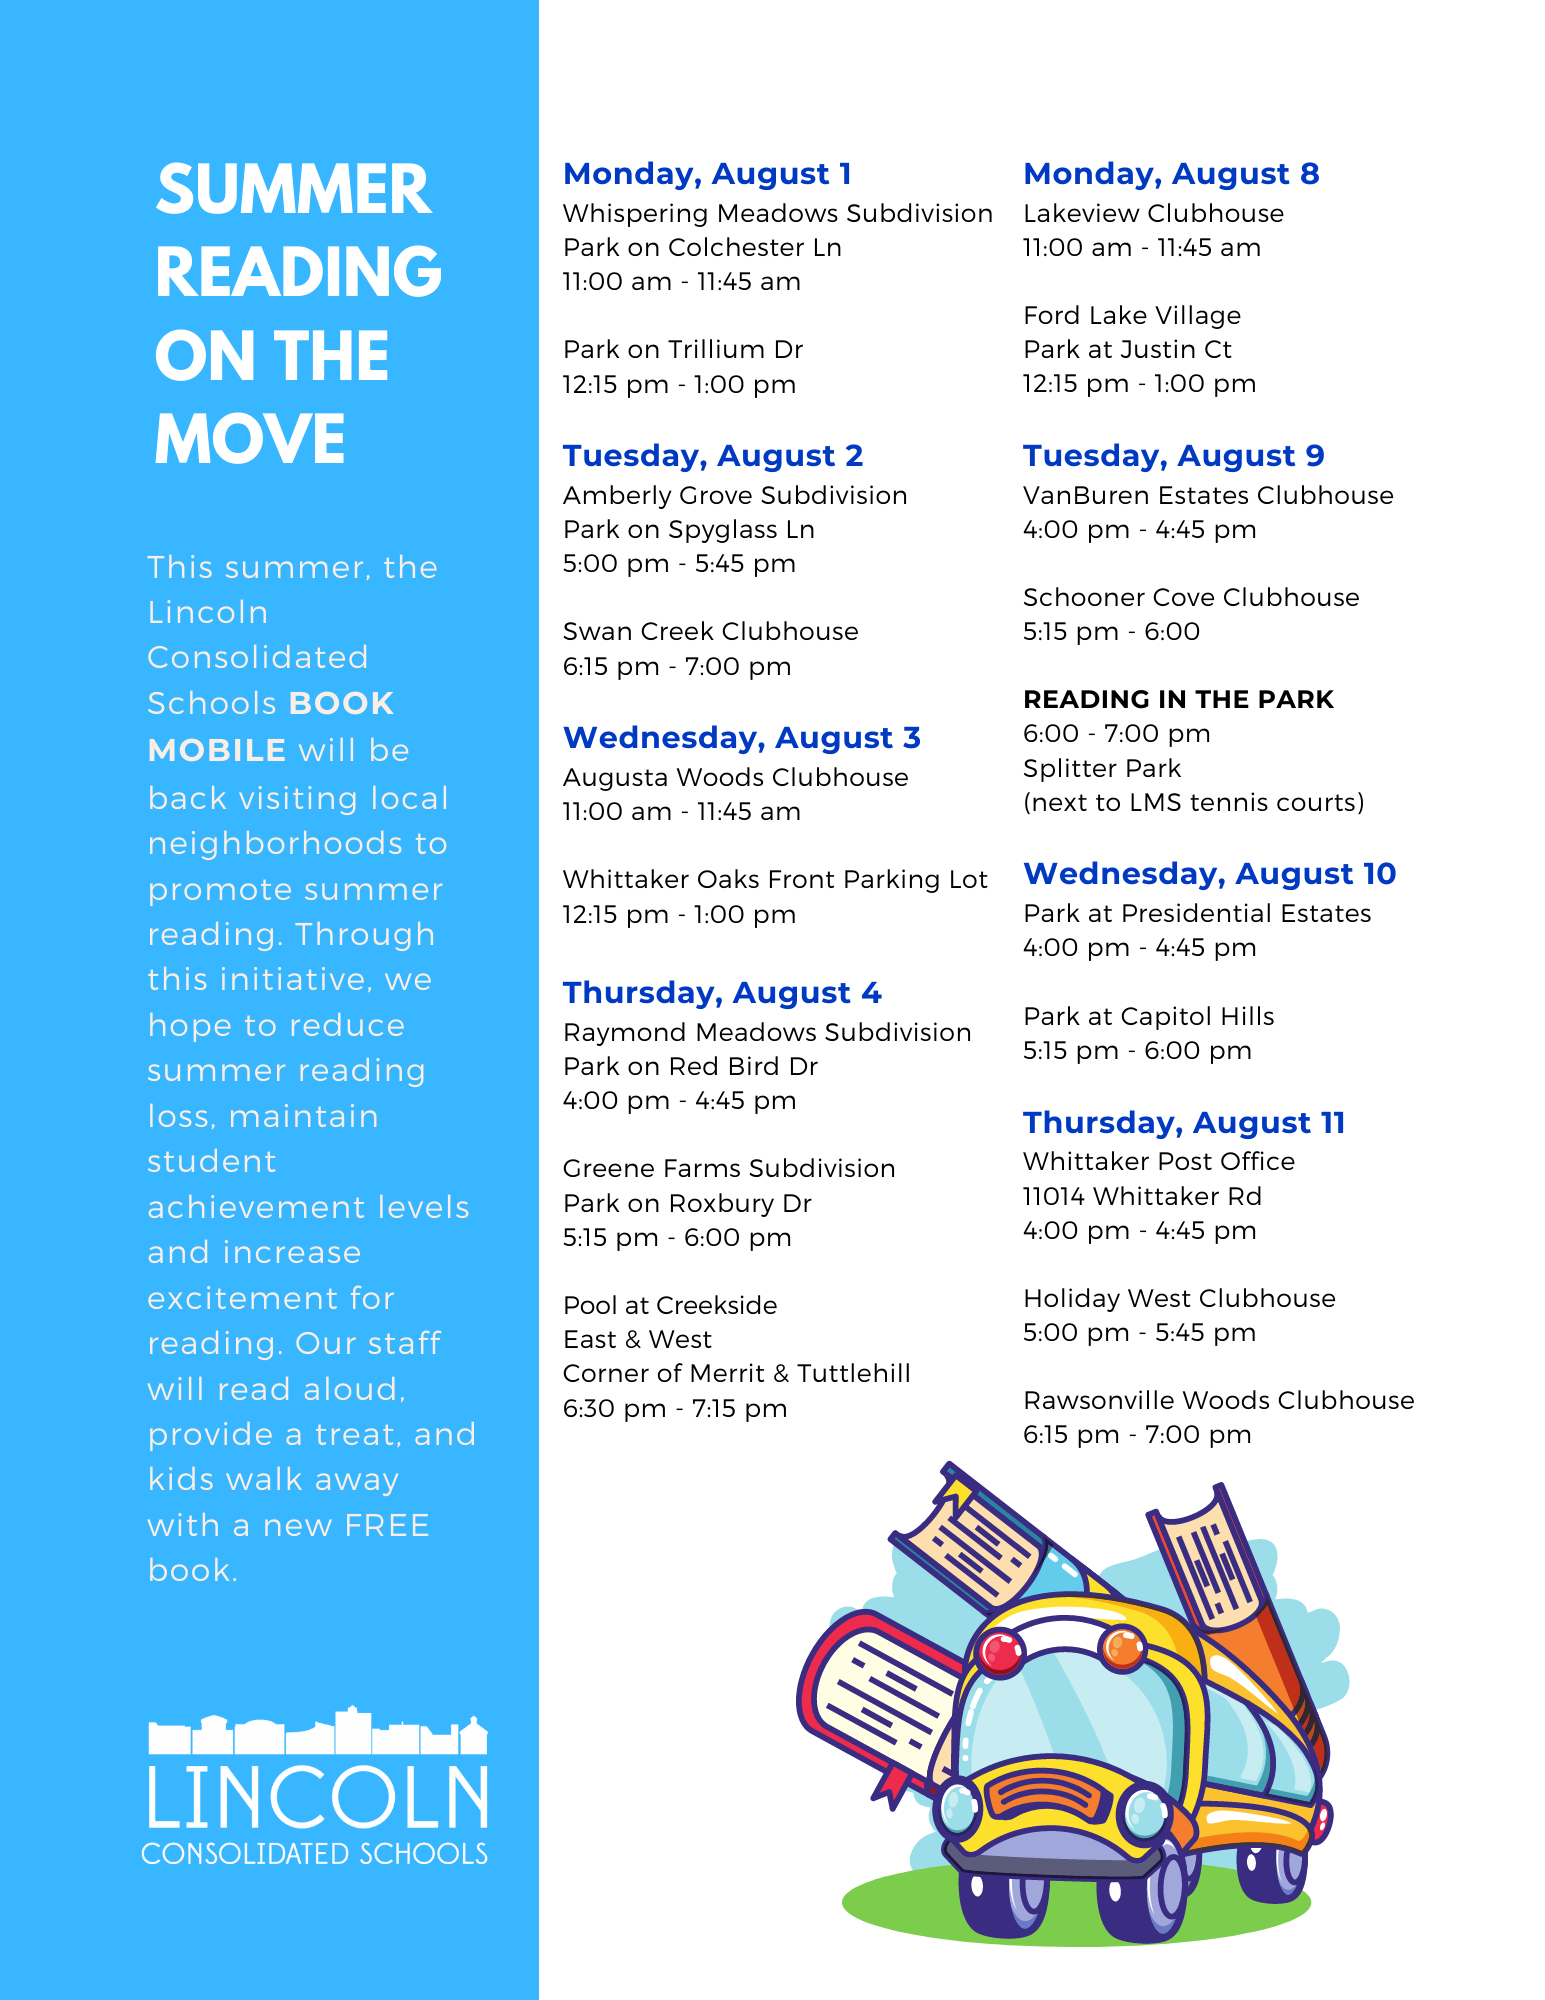 Summer Book Mobile on the Move